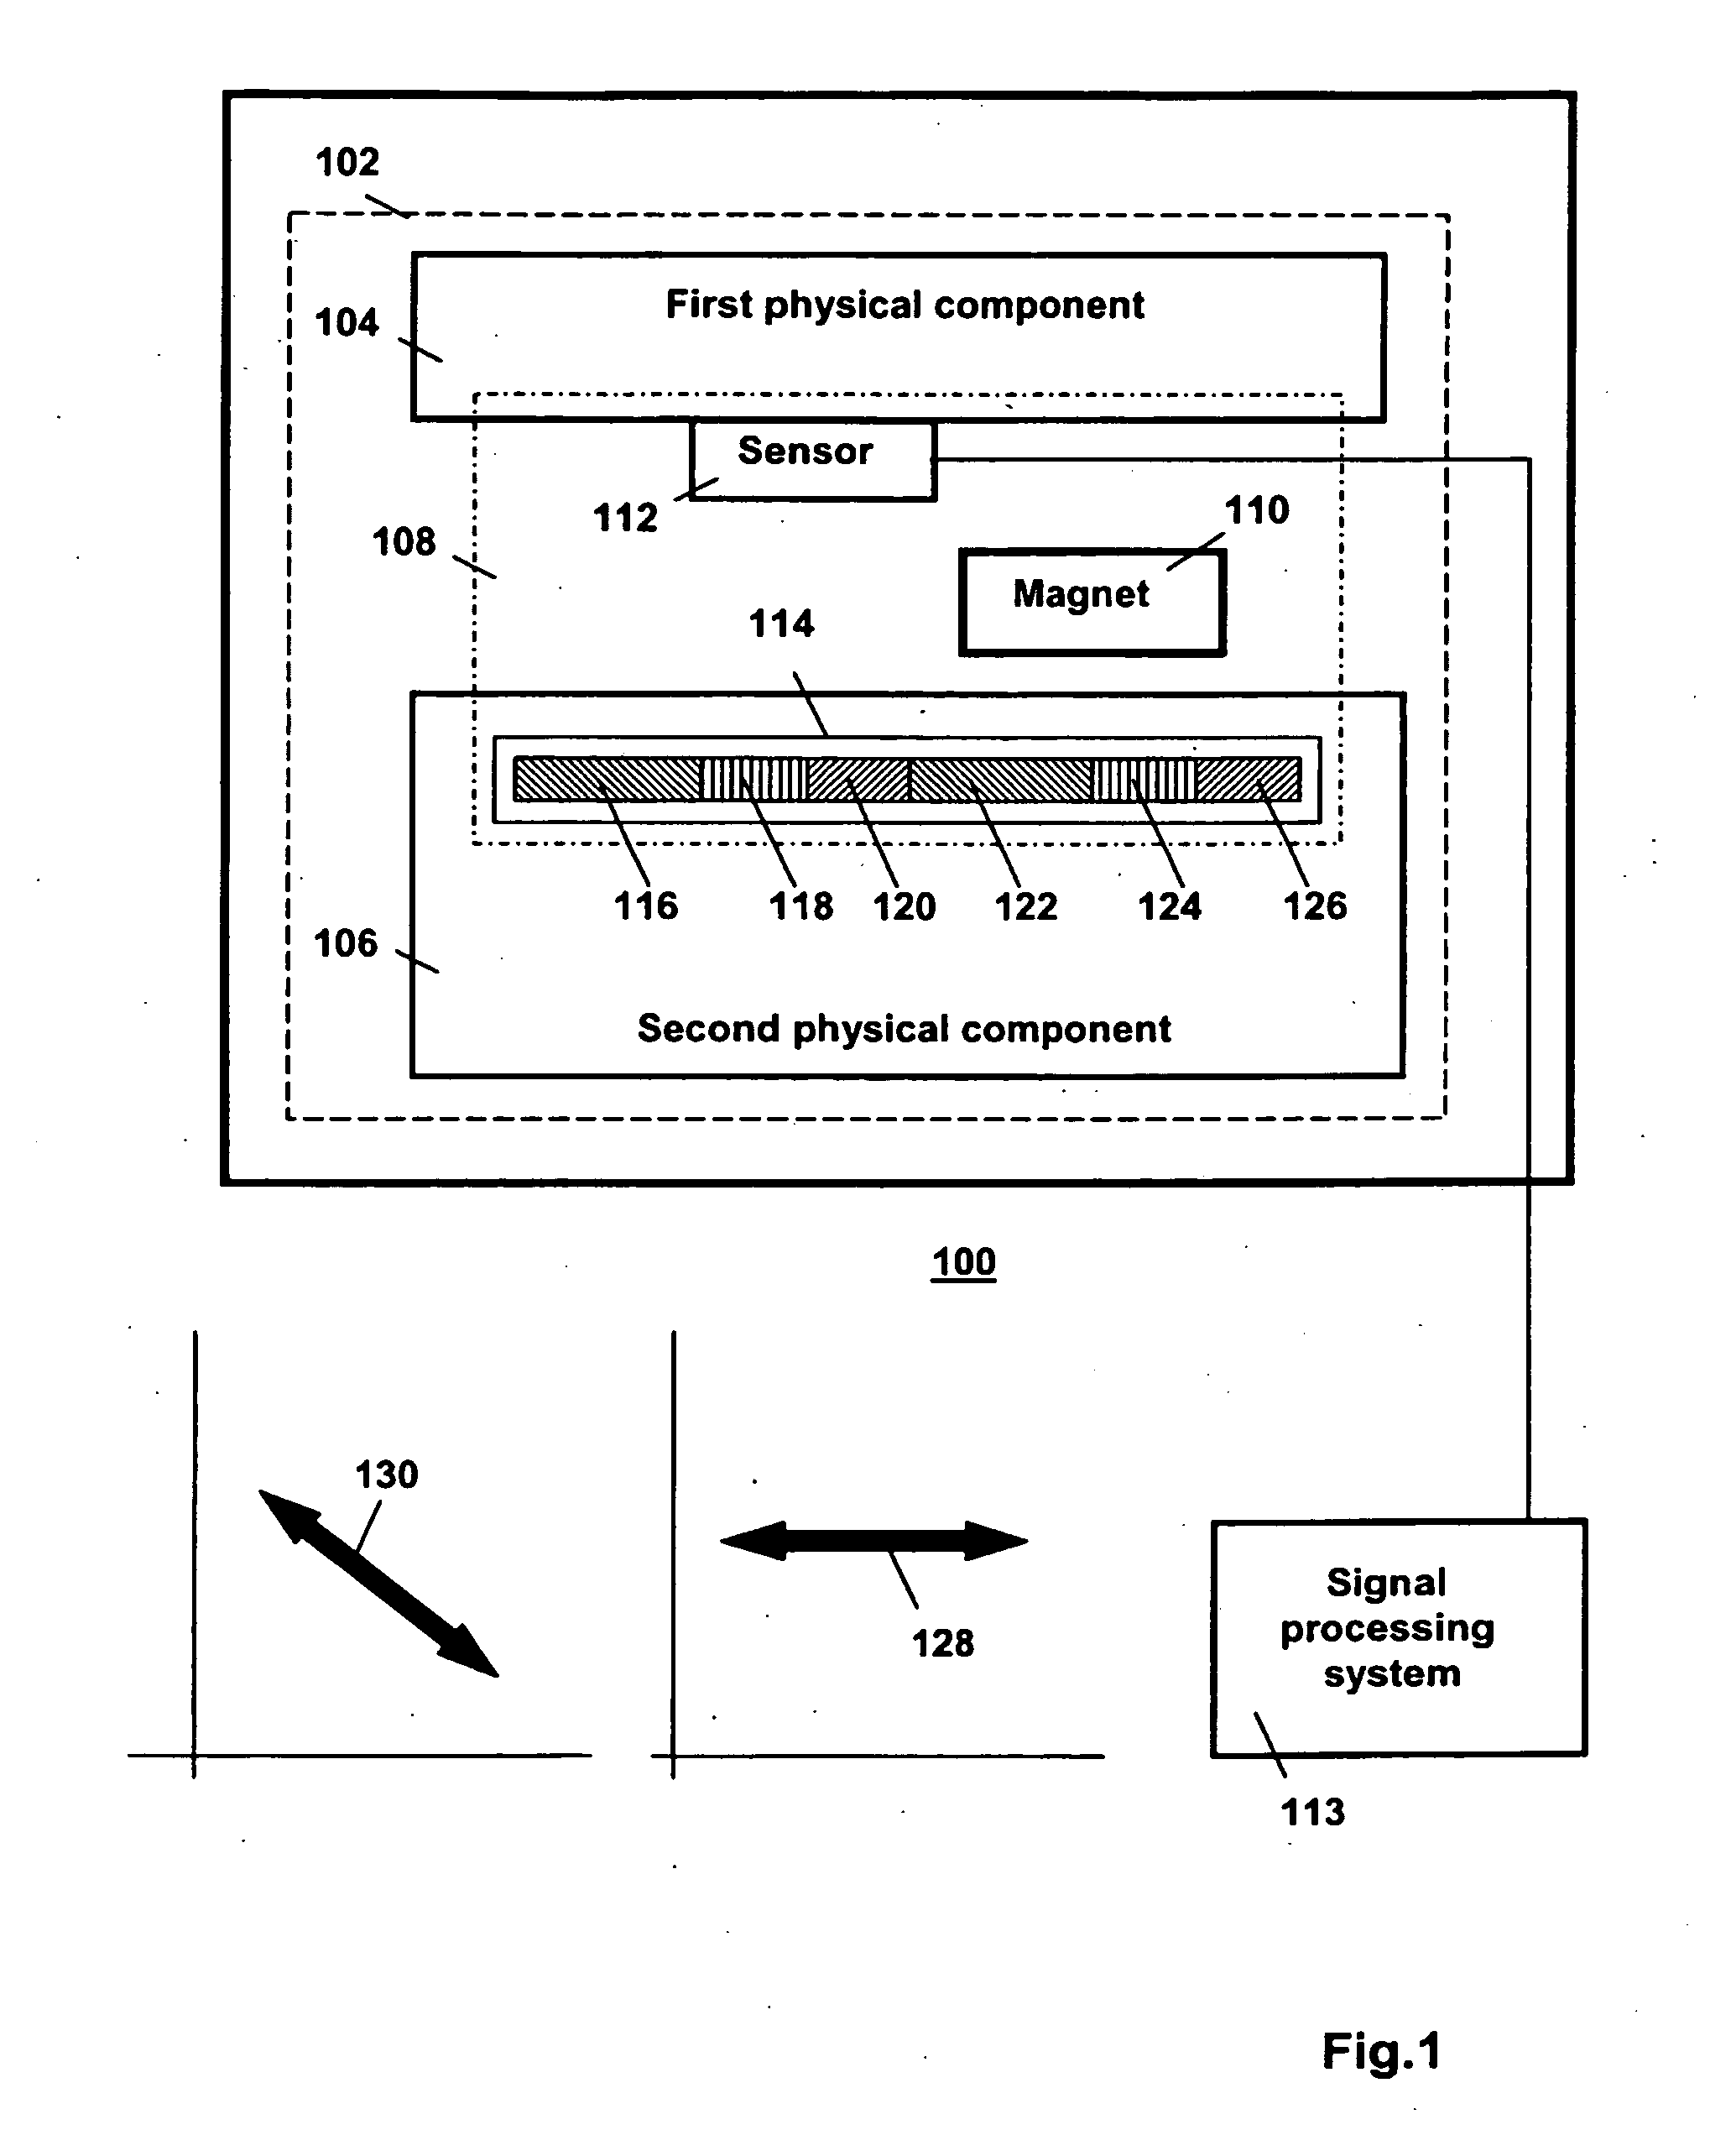 Kinematic-state encoder with magnetic sensor and target object